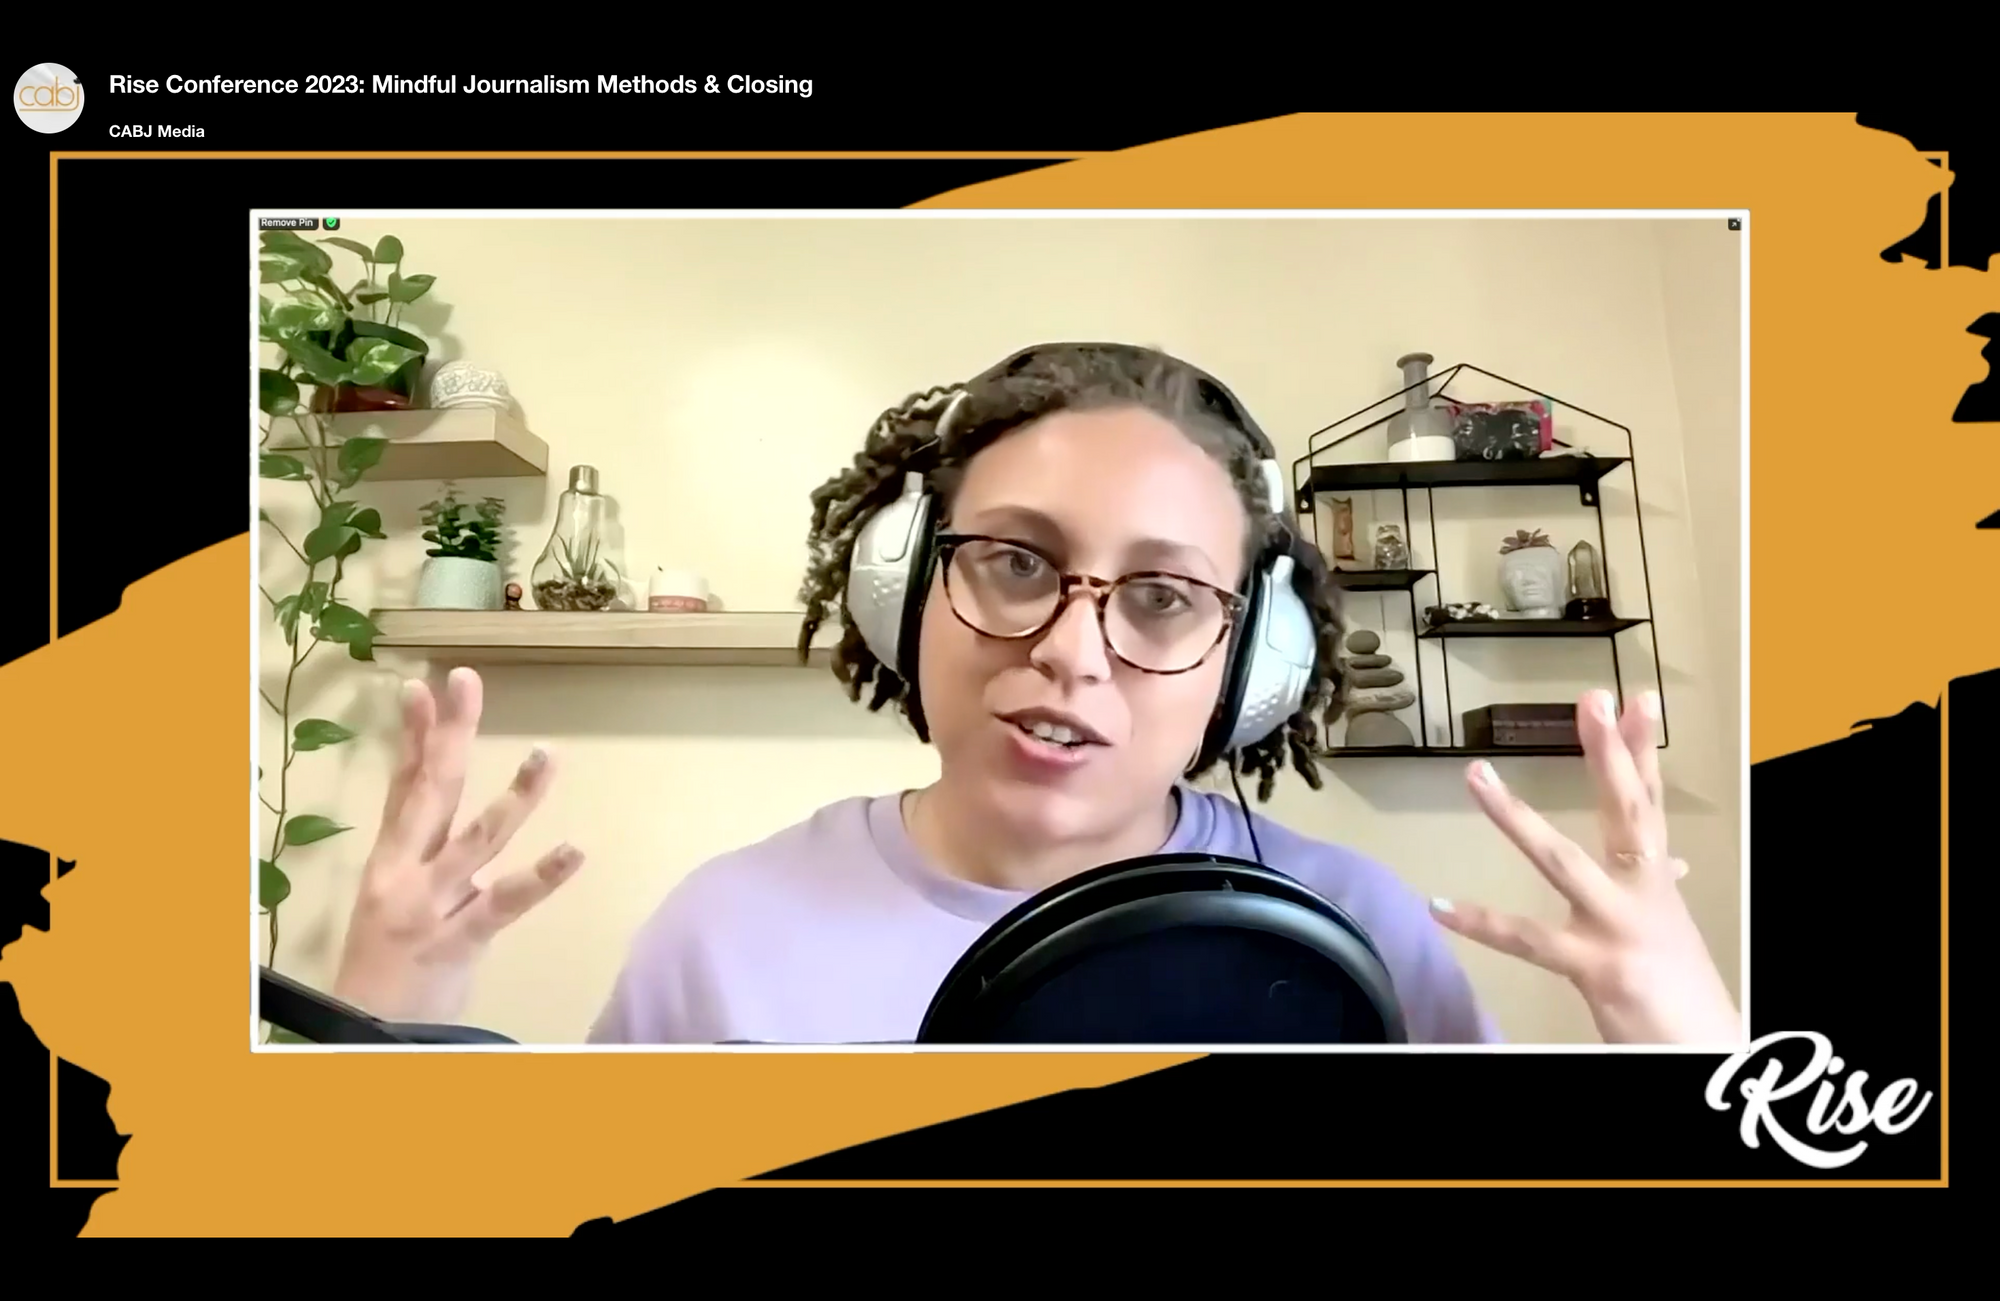 Twice As Good founder Sandra Hannebohm is seen presenting on Mindful Journalism Methods virtually at the RISE Conference for BIPOC journalists. On the wall behind her are various wall shelves with decorative objects and plants.